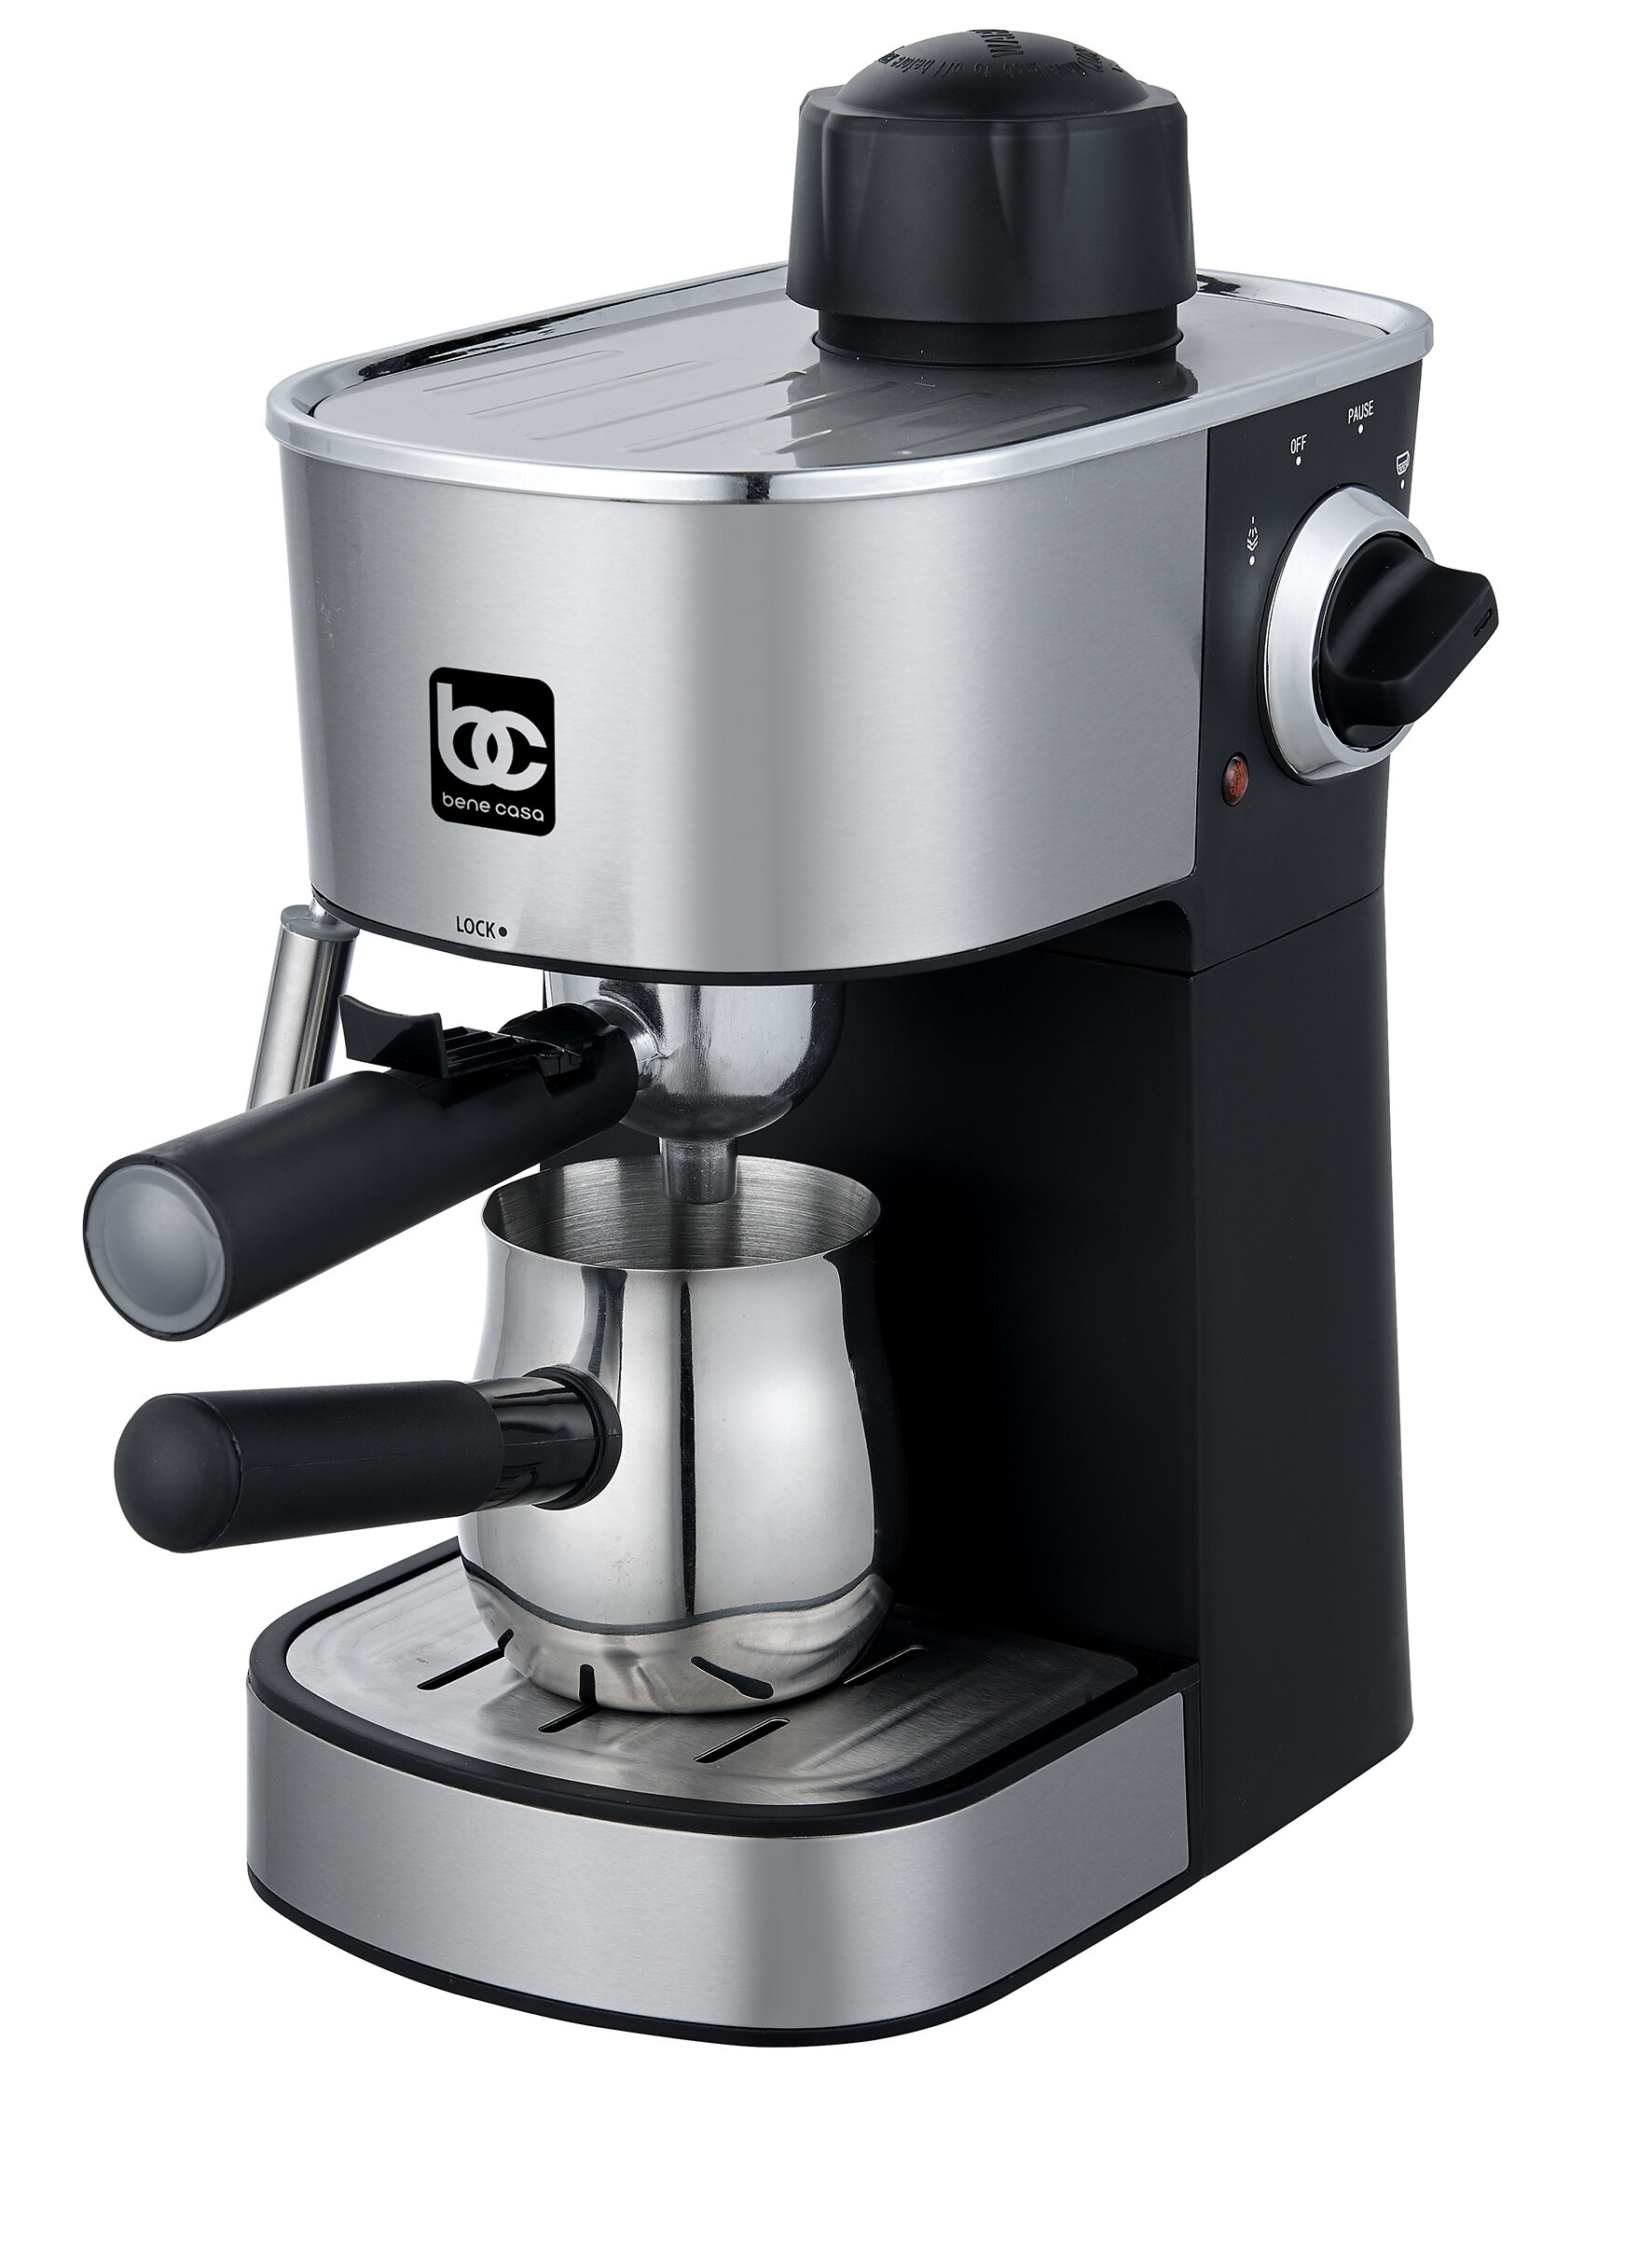 Galanz Espresso Machine with Frother & Reviews